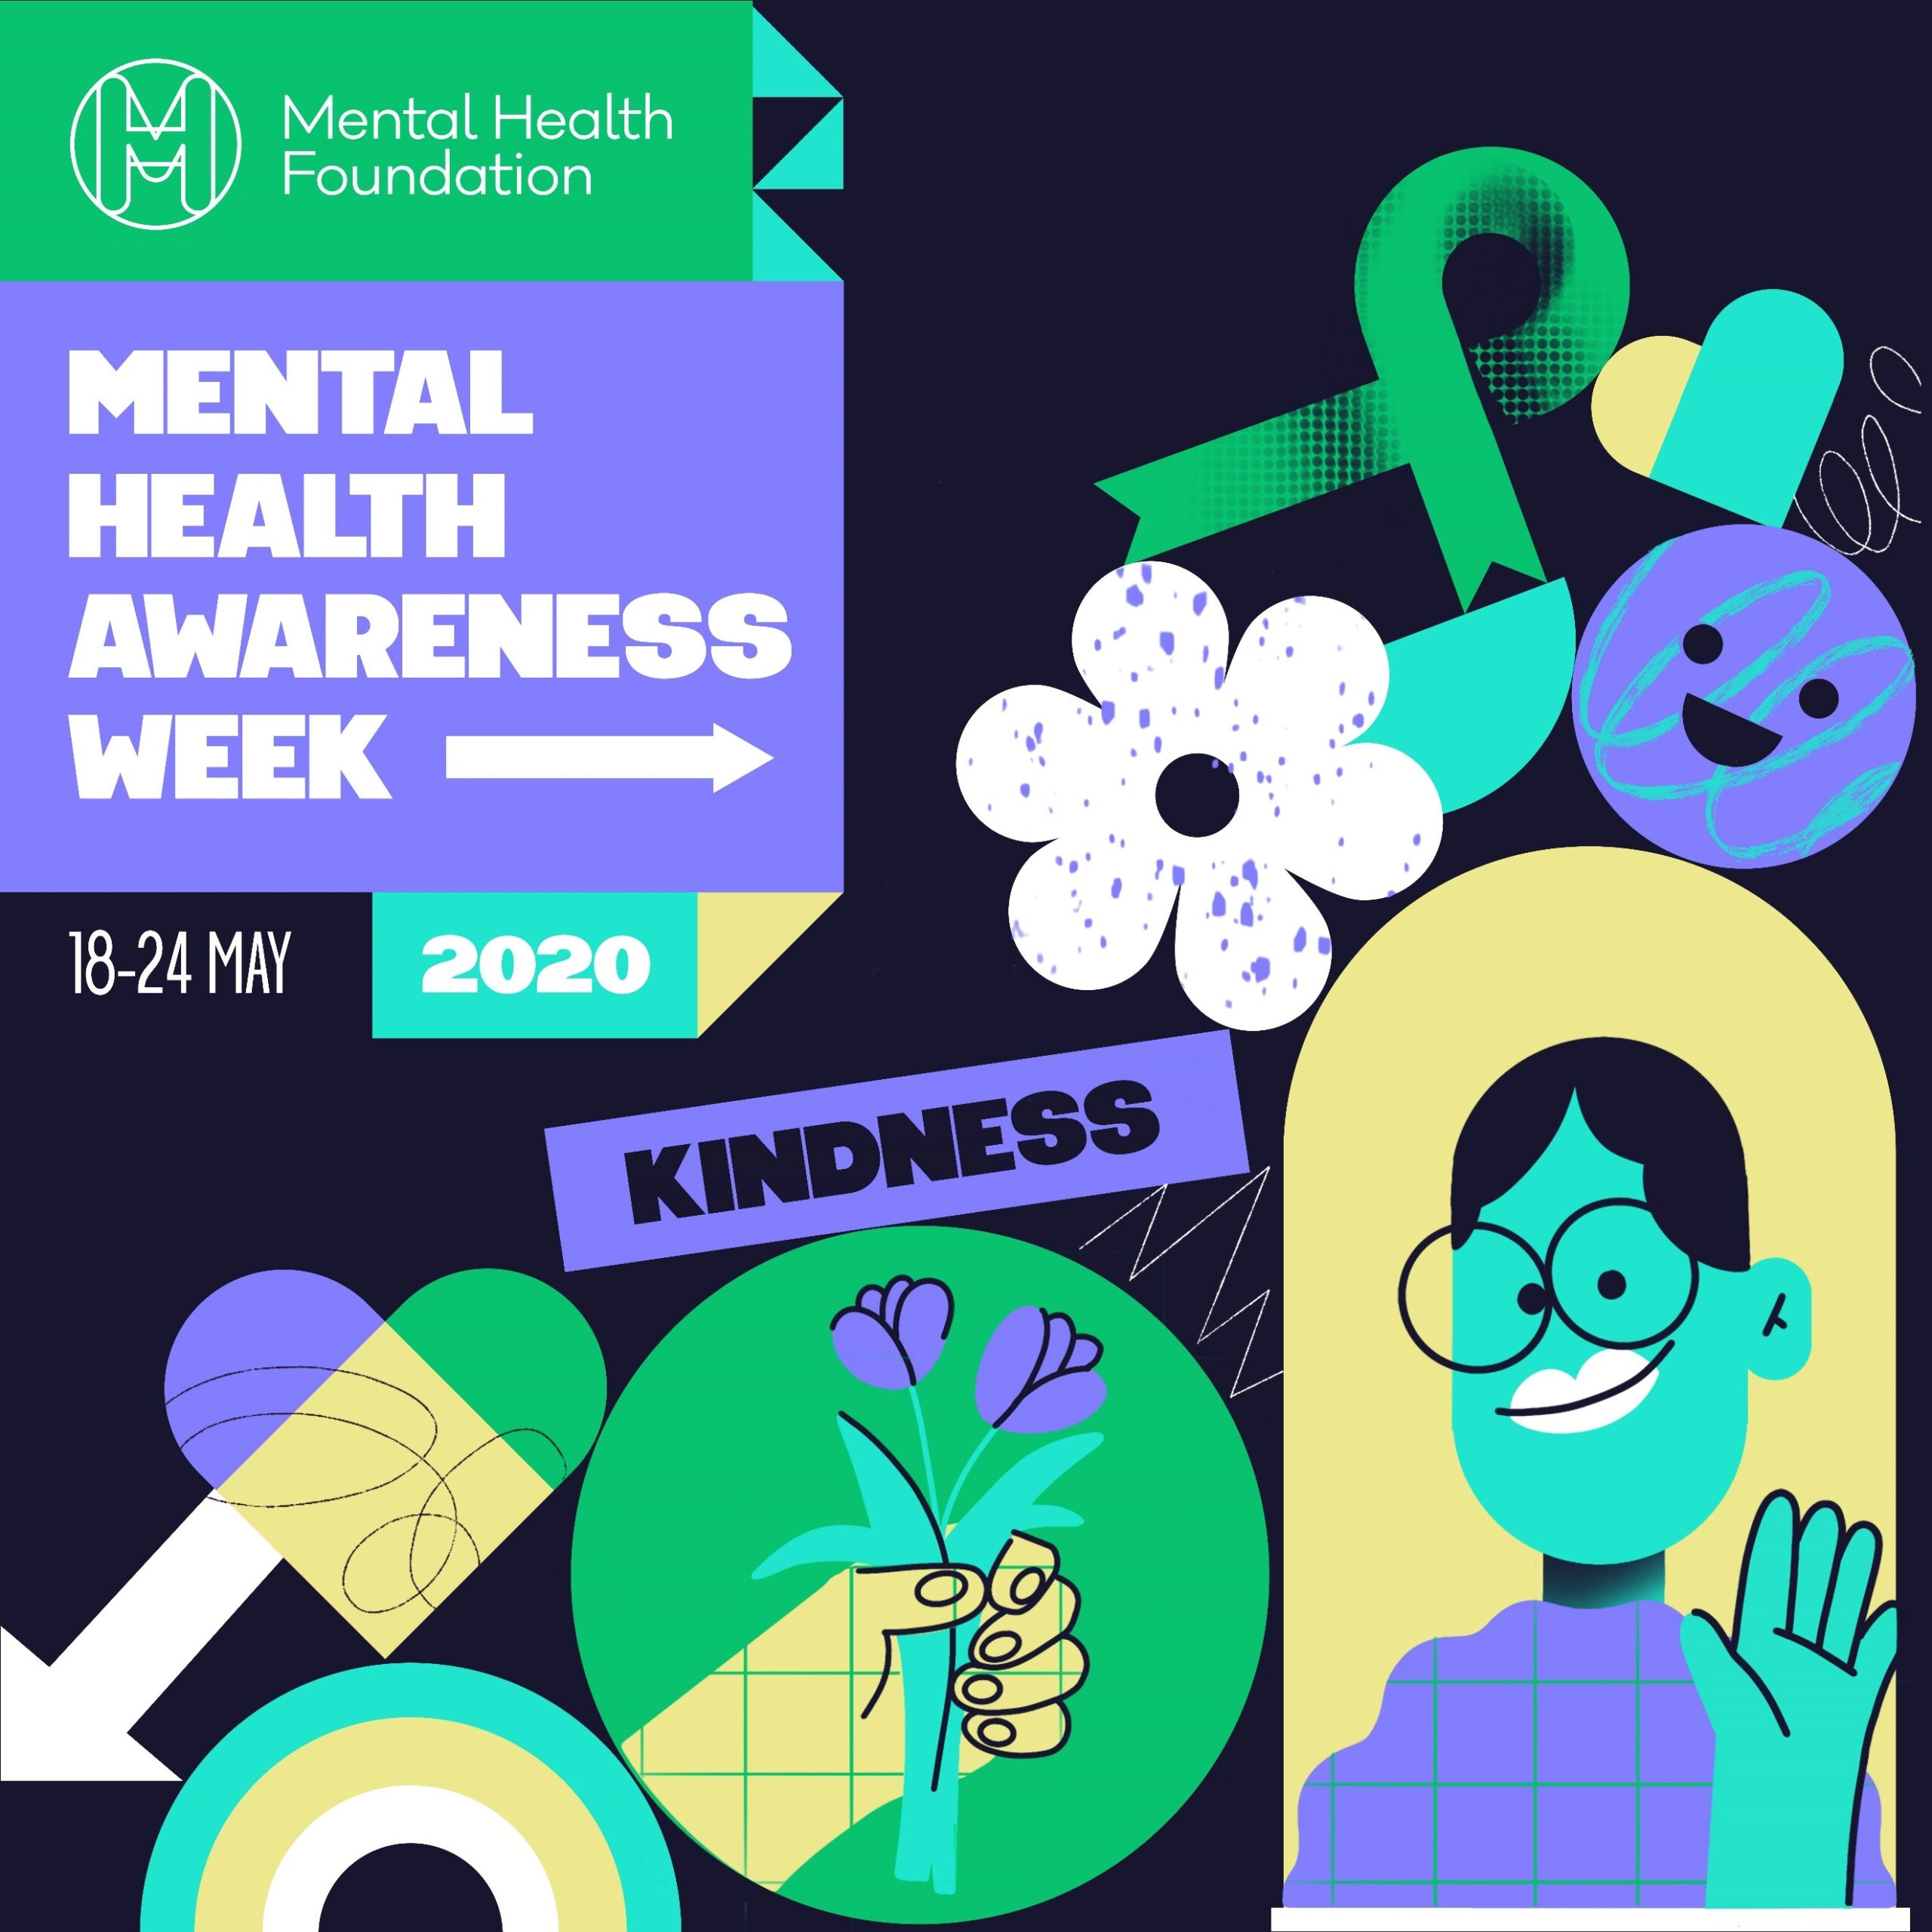 Mental Health Awareness Week- Kindness. What can you do?